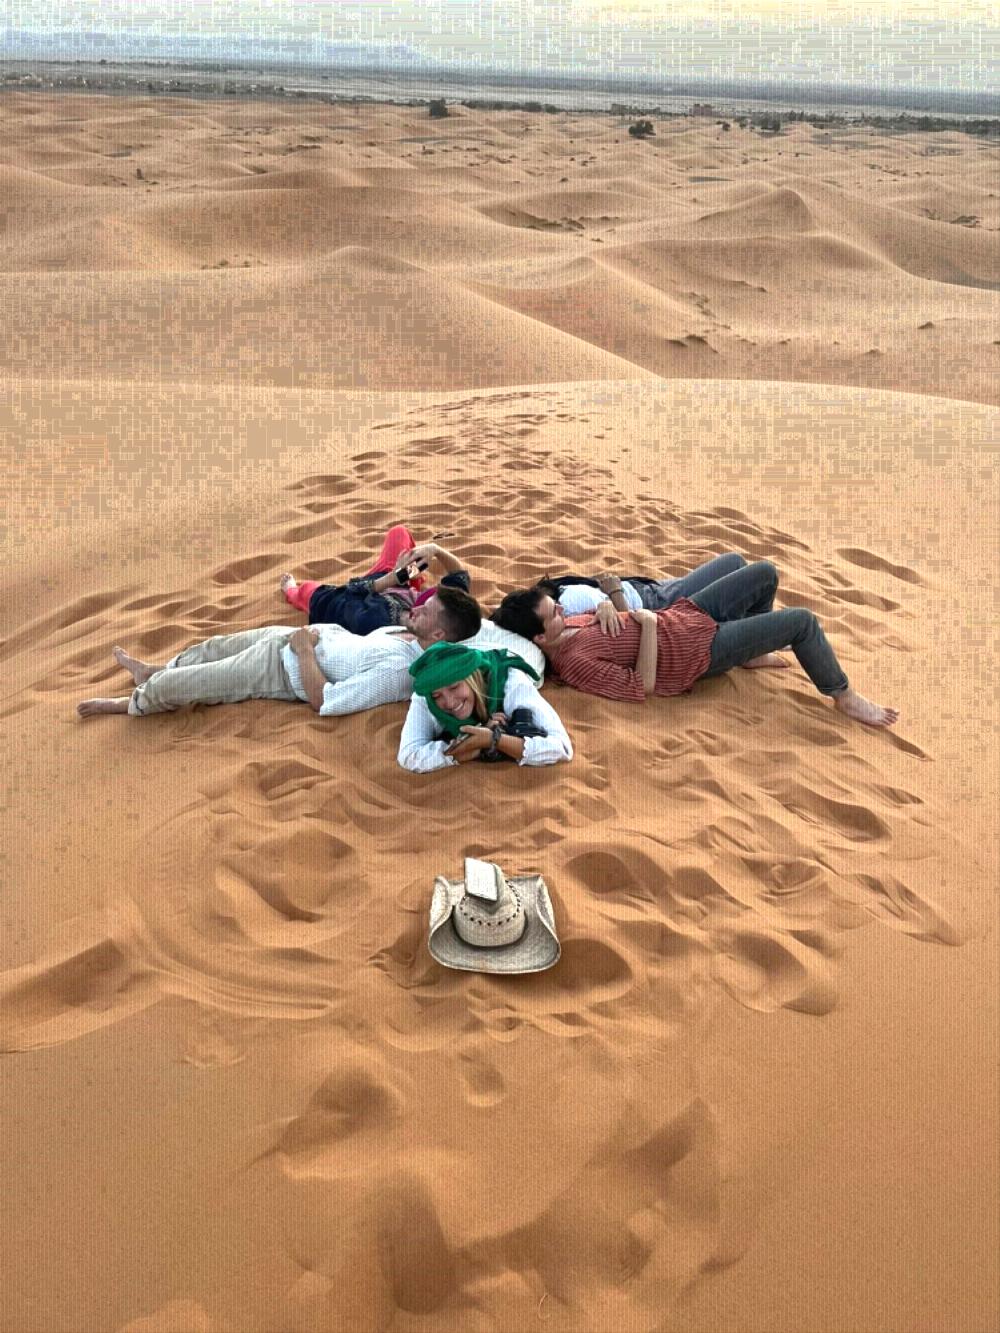 students in the desert